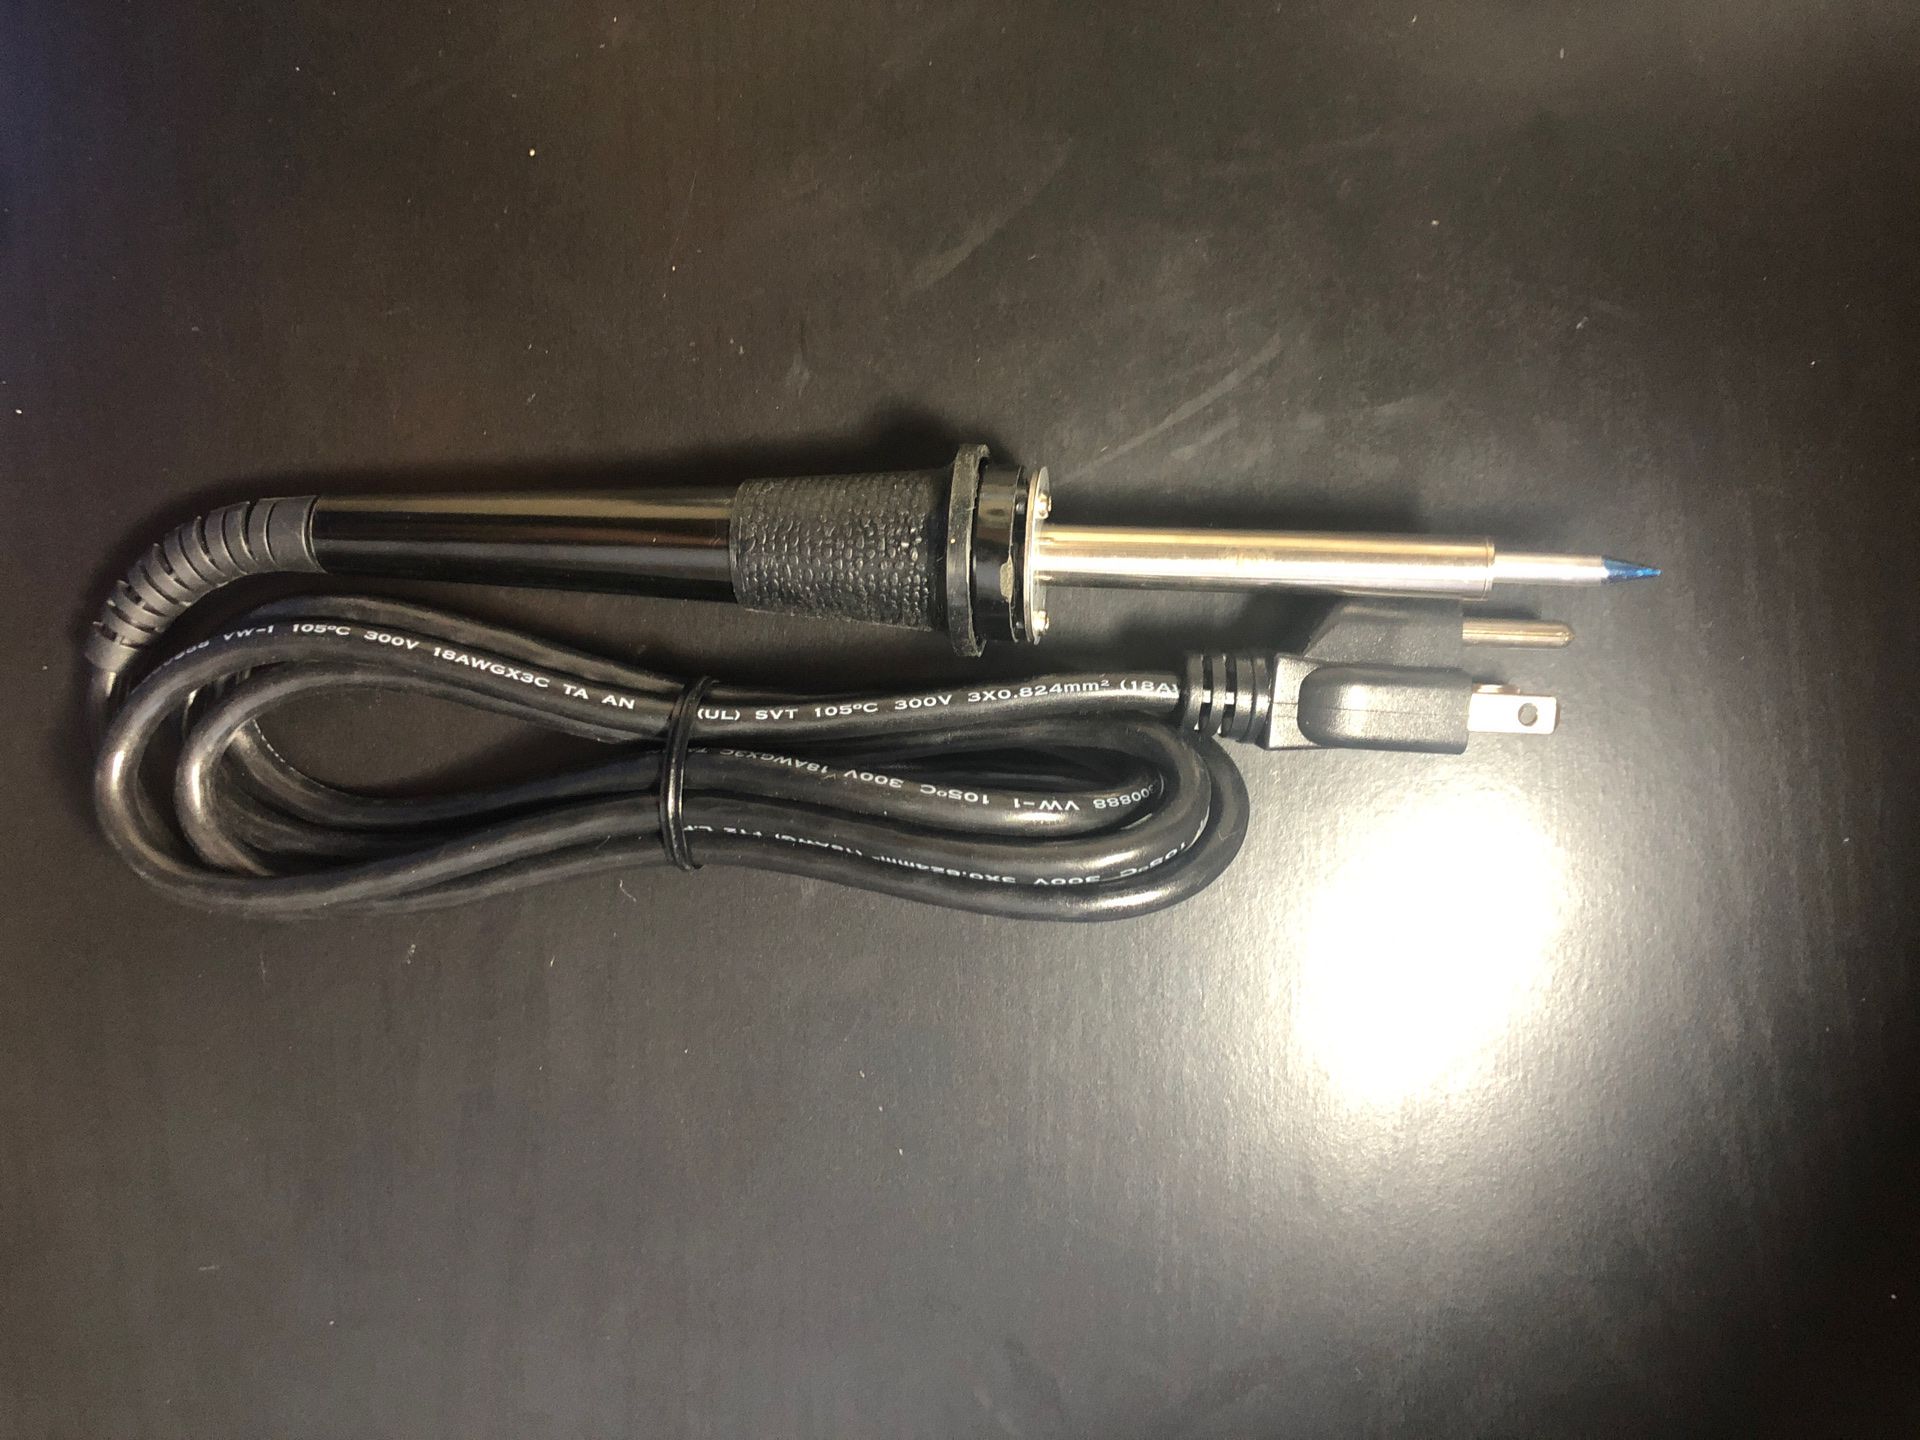 RSR High Performance UL Listed Soldering Iron with 3-Prong Plug